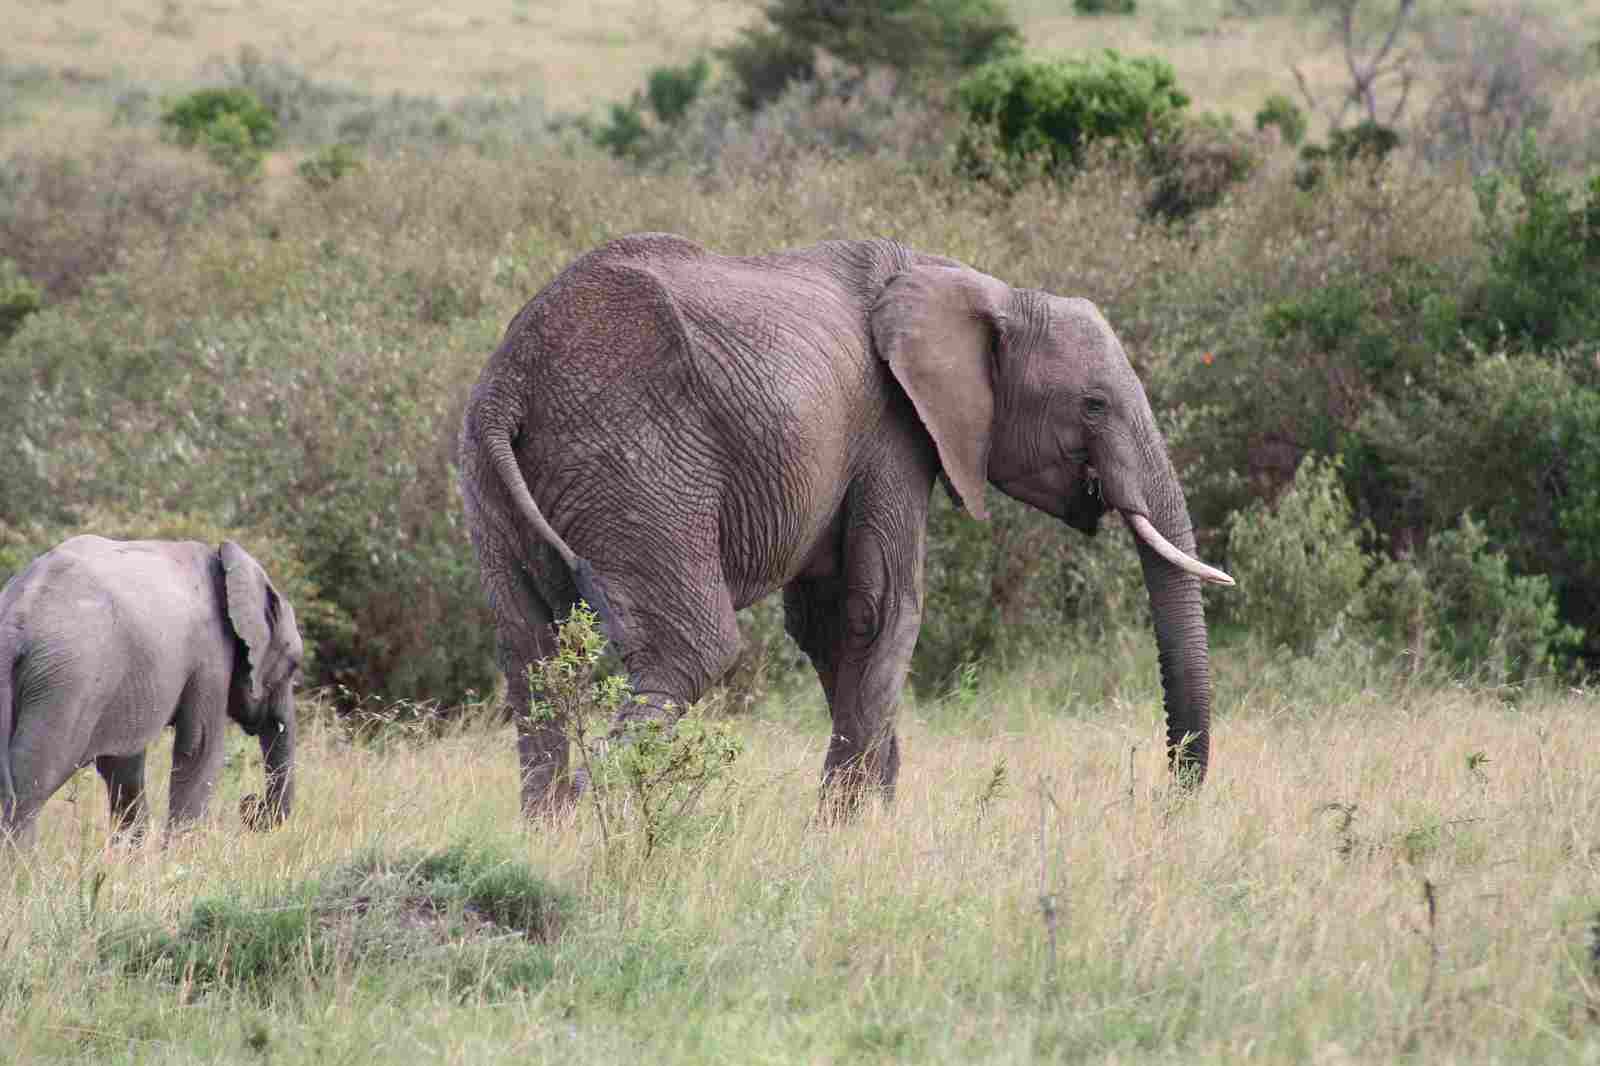 African Elephant Vs Asian Elephant: When Undisturbed, the African Elephant is Not Aggressive or Dangerous (Credit: shankar s. 2010, Uploaded Online 2012 .CC BY 2.0.)